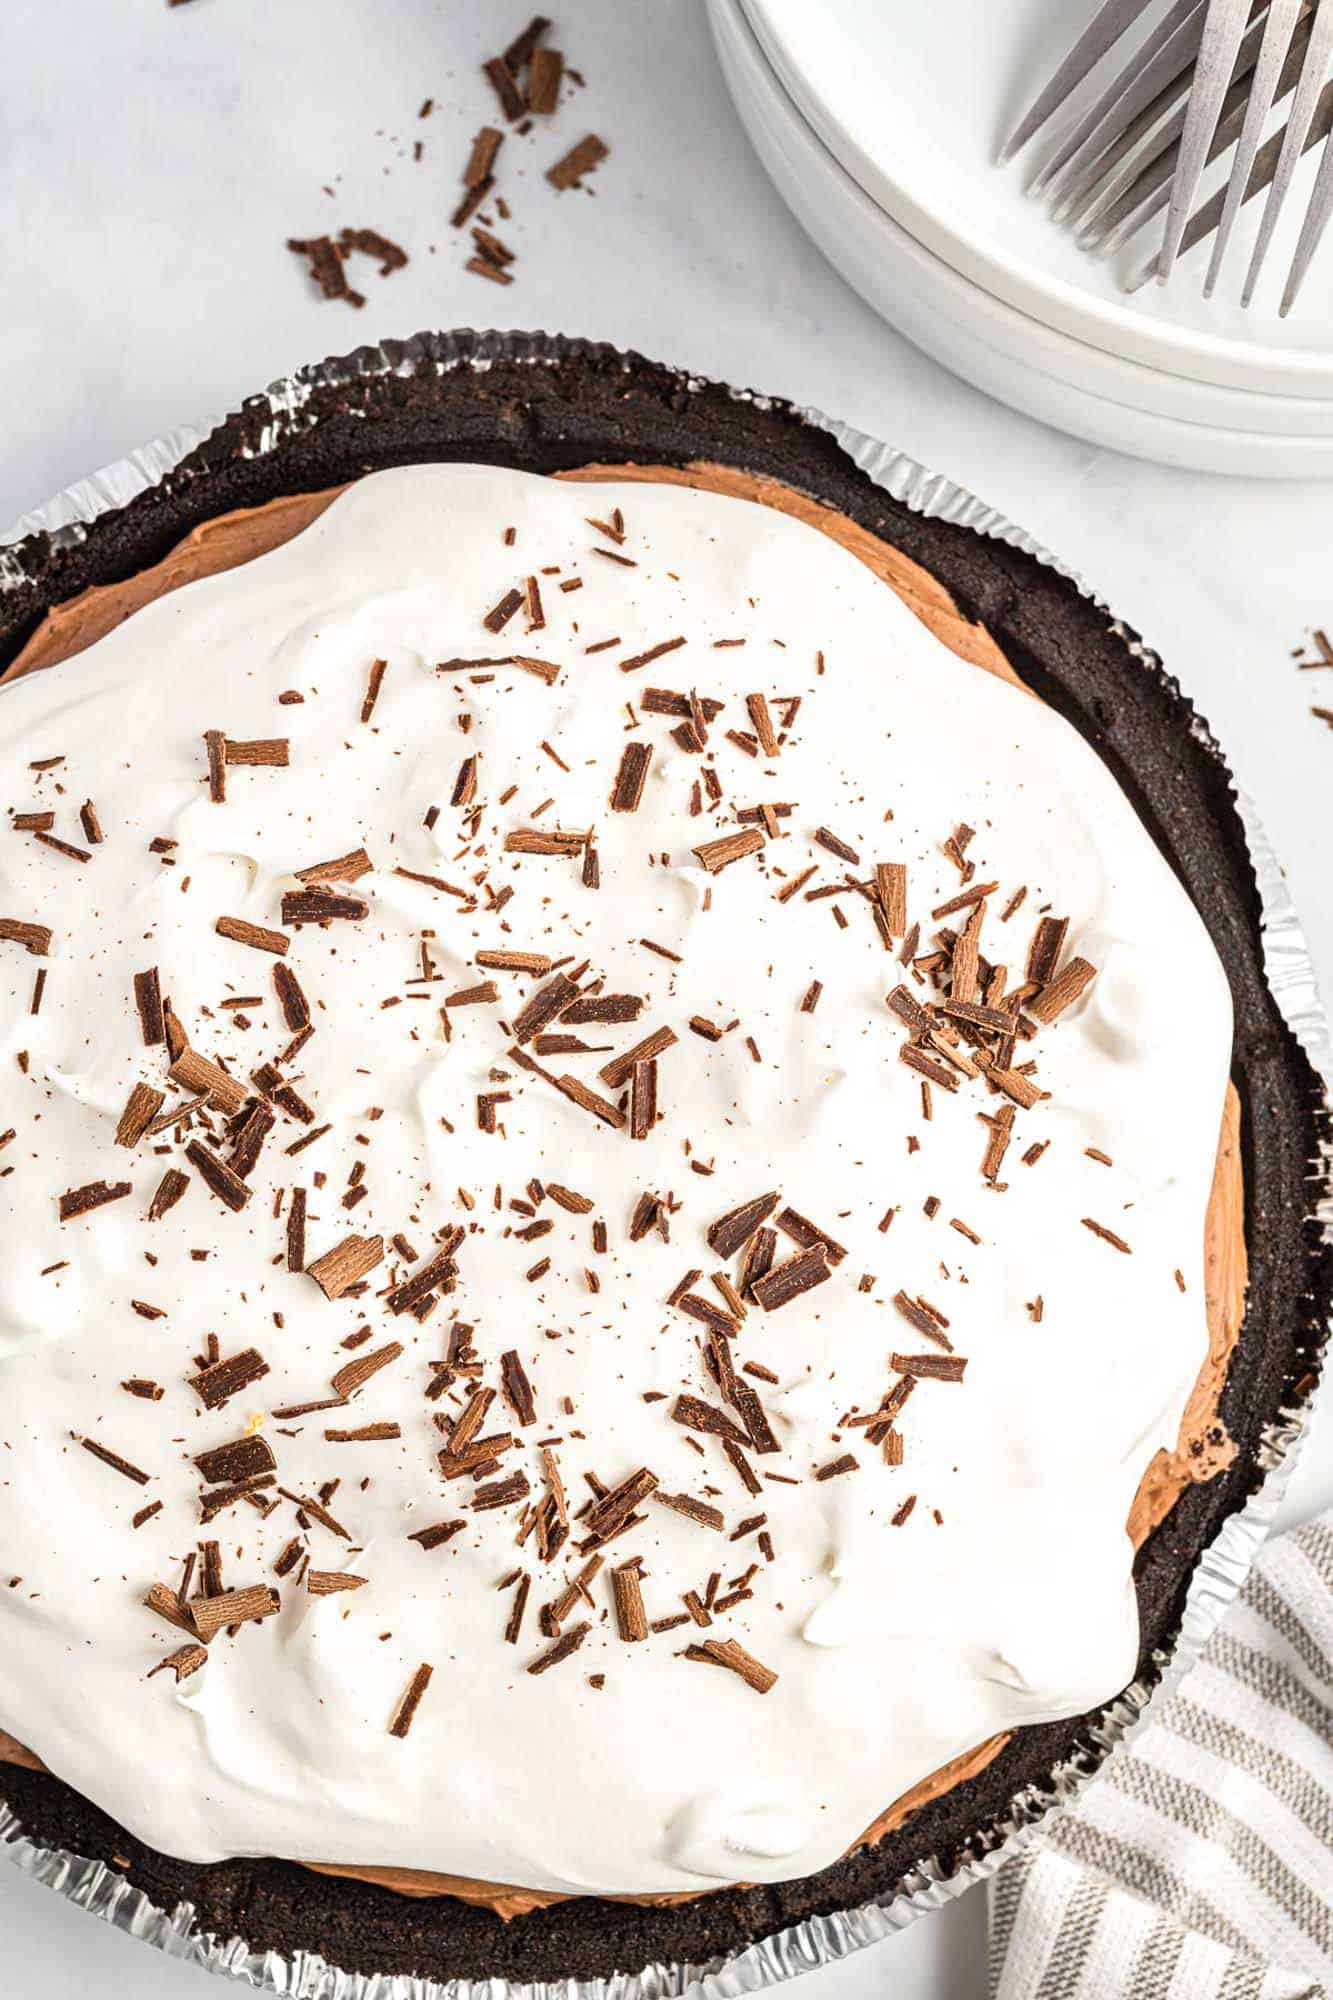 a chocolate pudding pie with whipped topping and chocolate shavings, viewed from above.